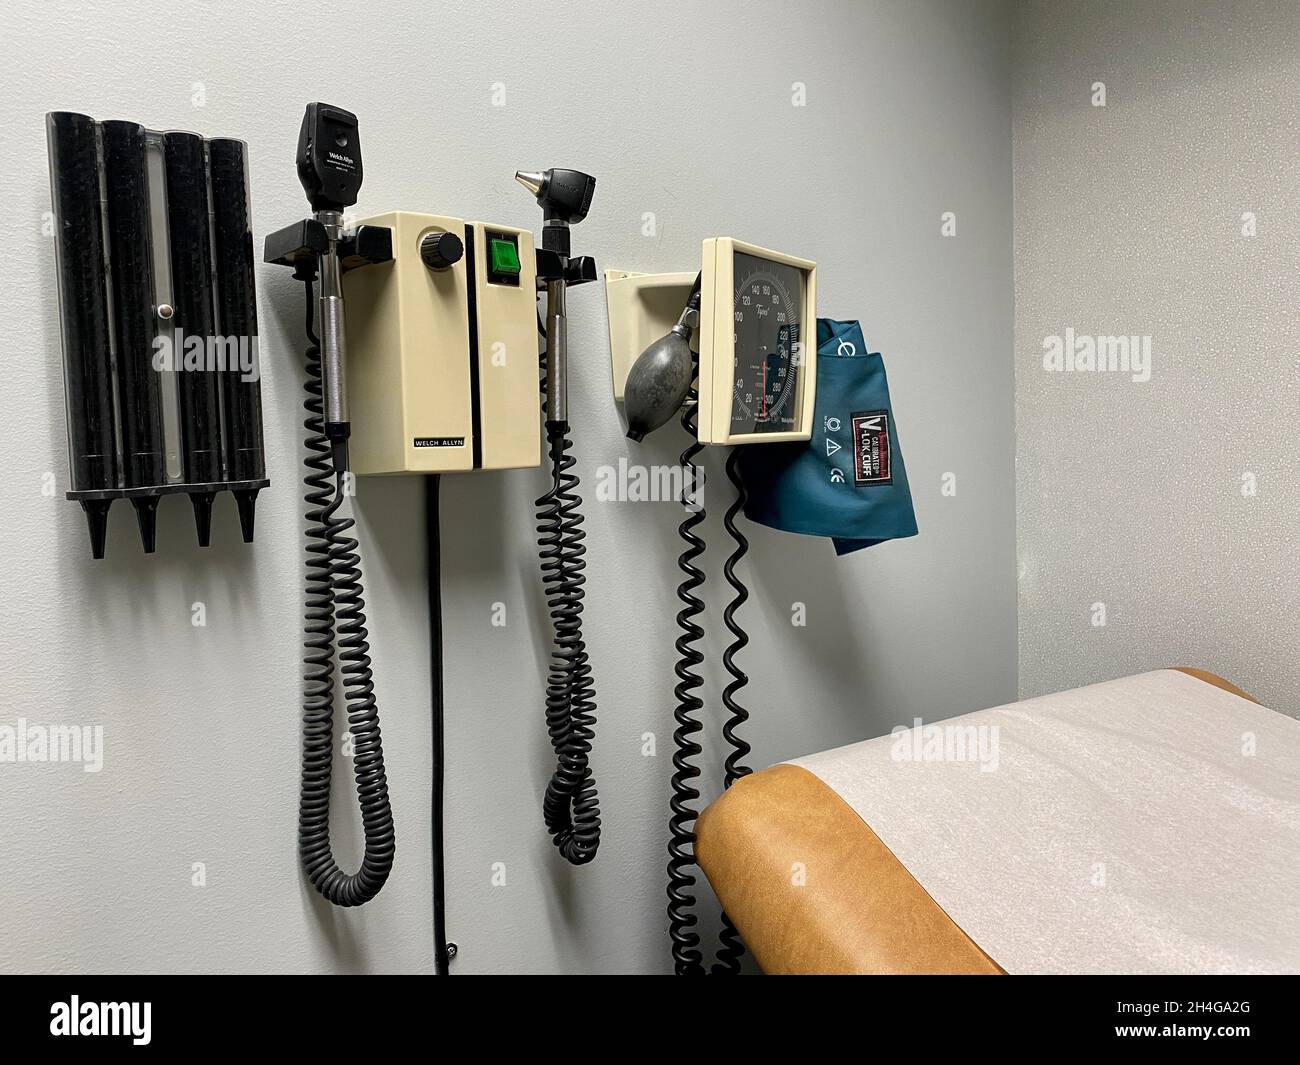 Integrated diagnostic system of medical equipment on the wall in a doctor's office Stock Photo